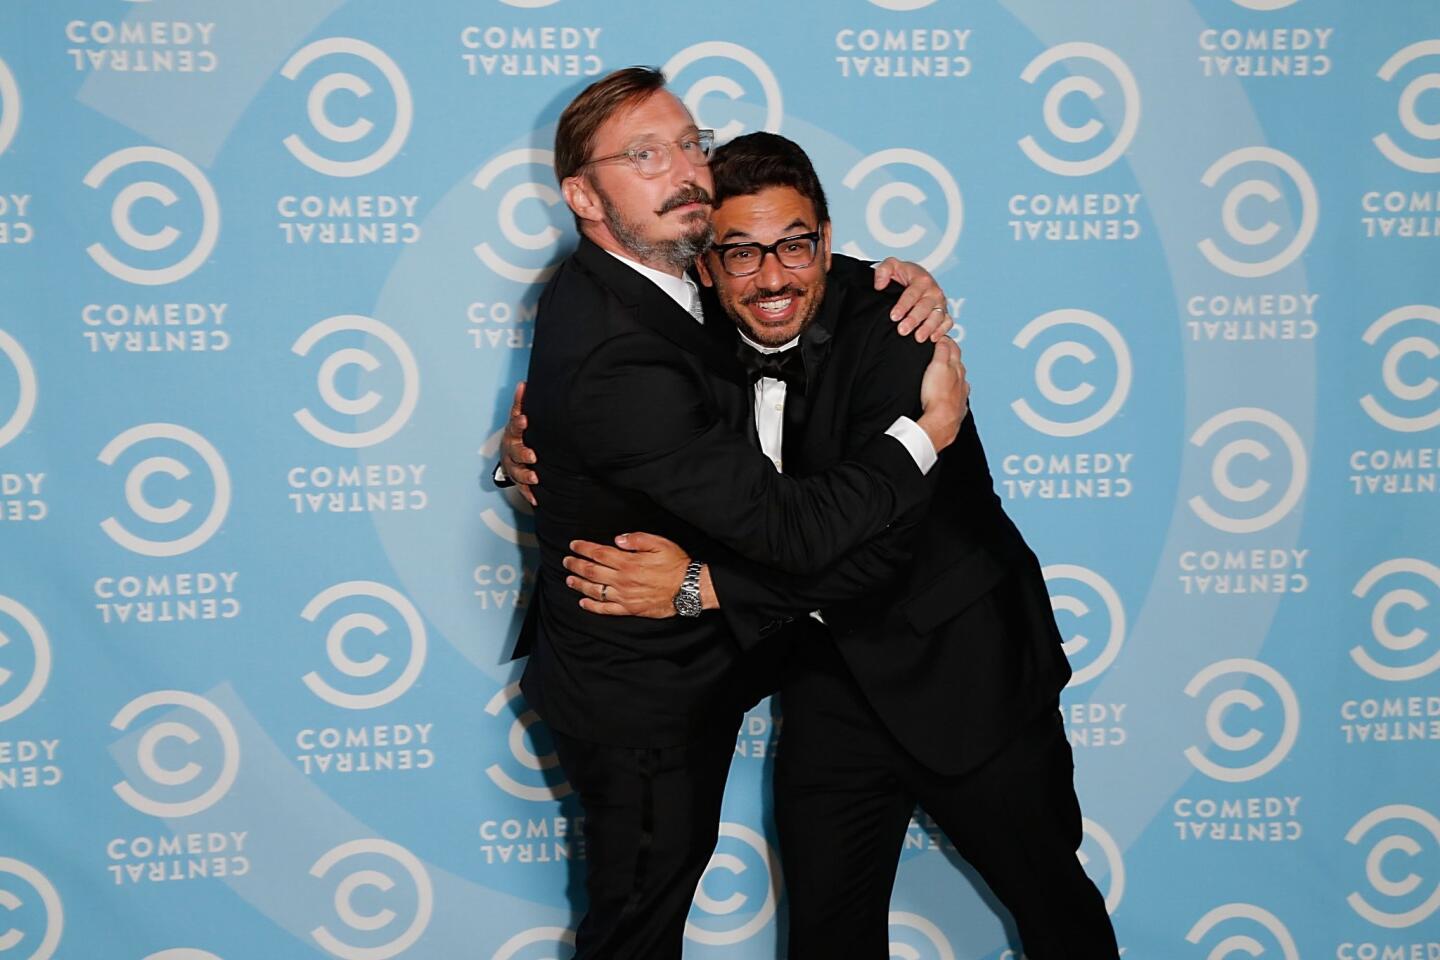 Comedy Central Emmys after-party